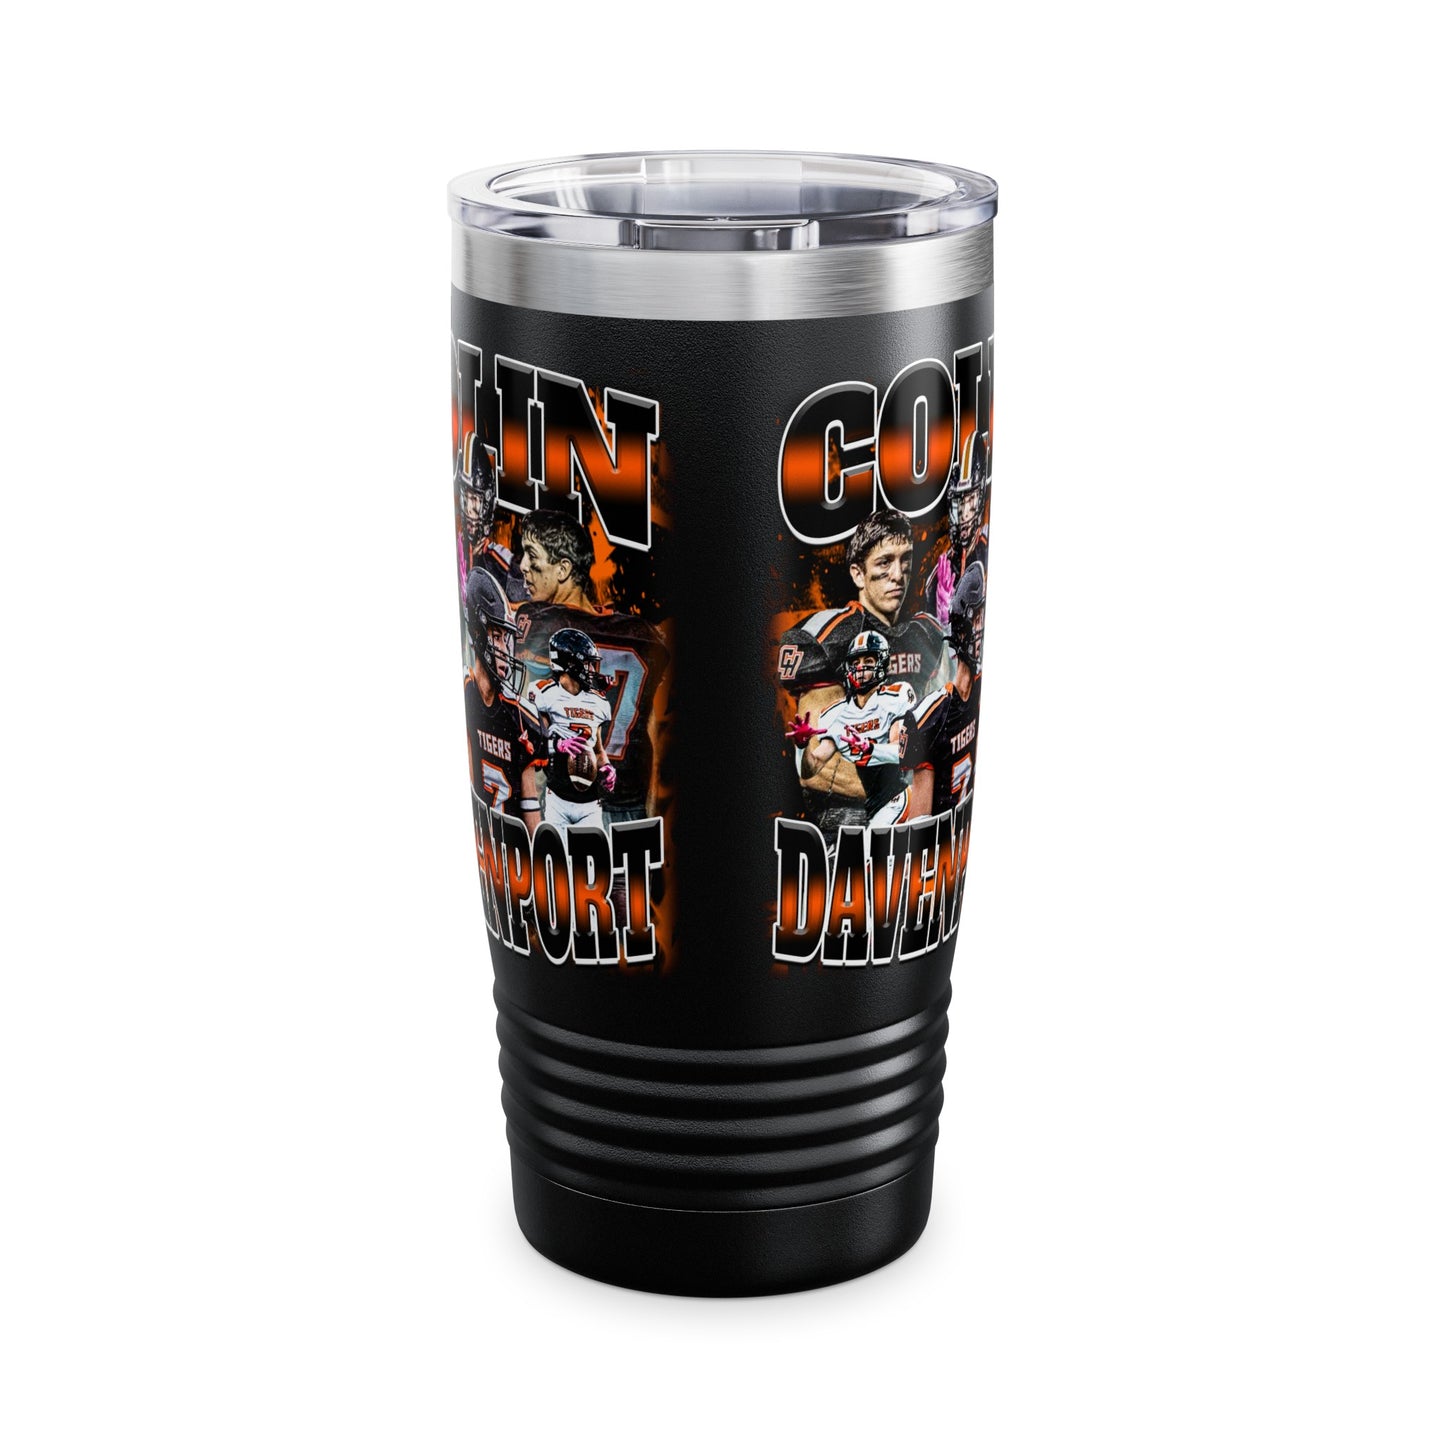 Colin Davenport Stainless Steal Tumbler